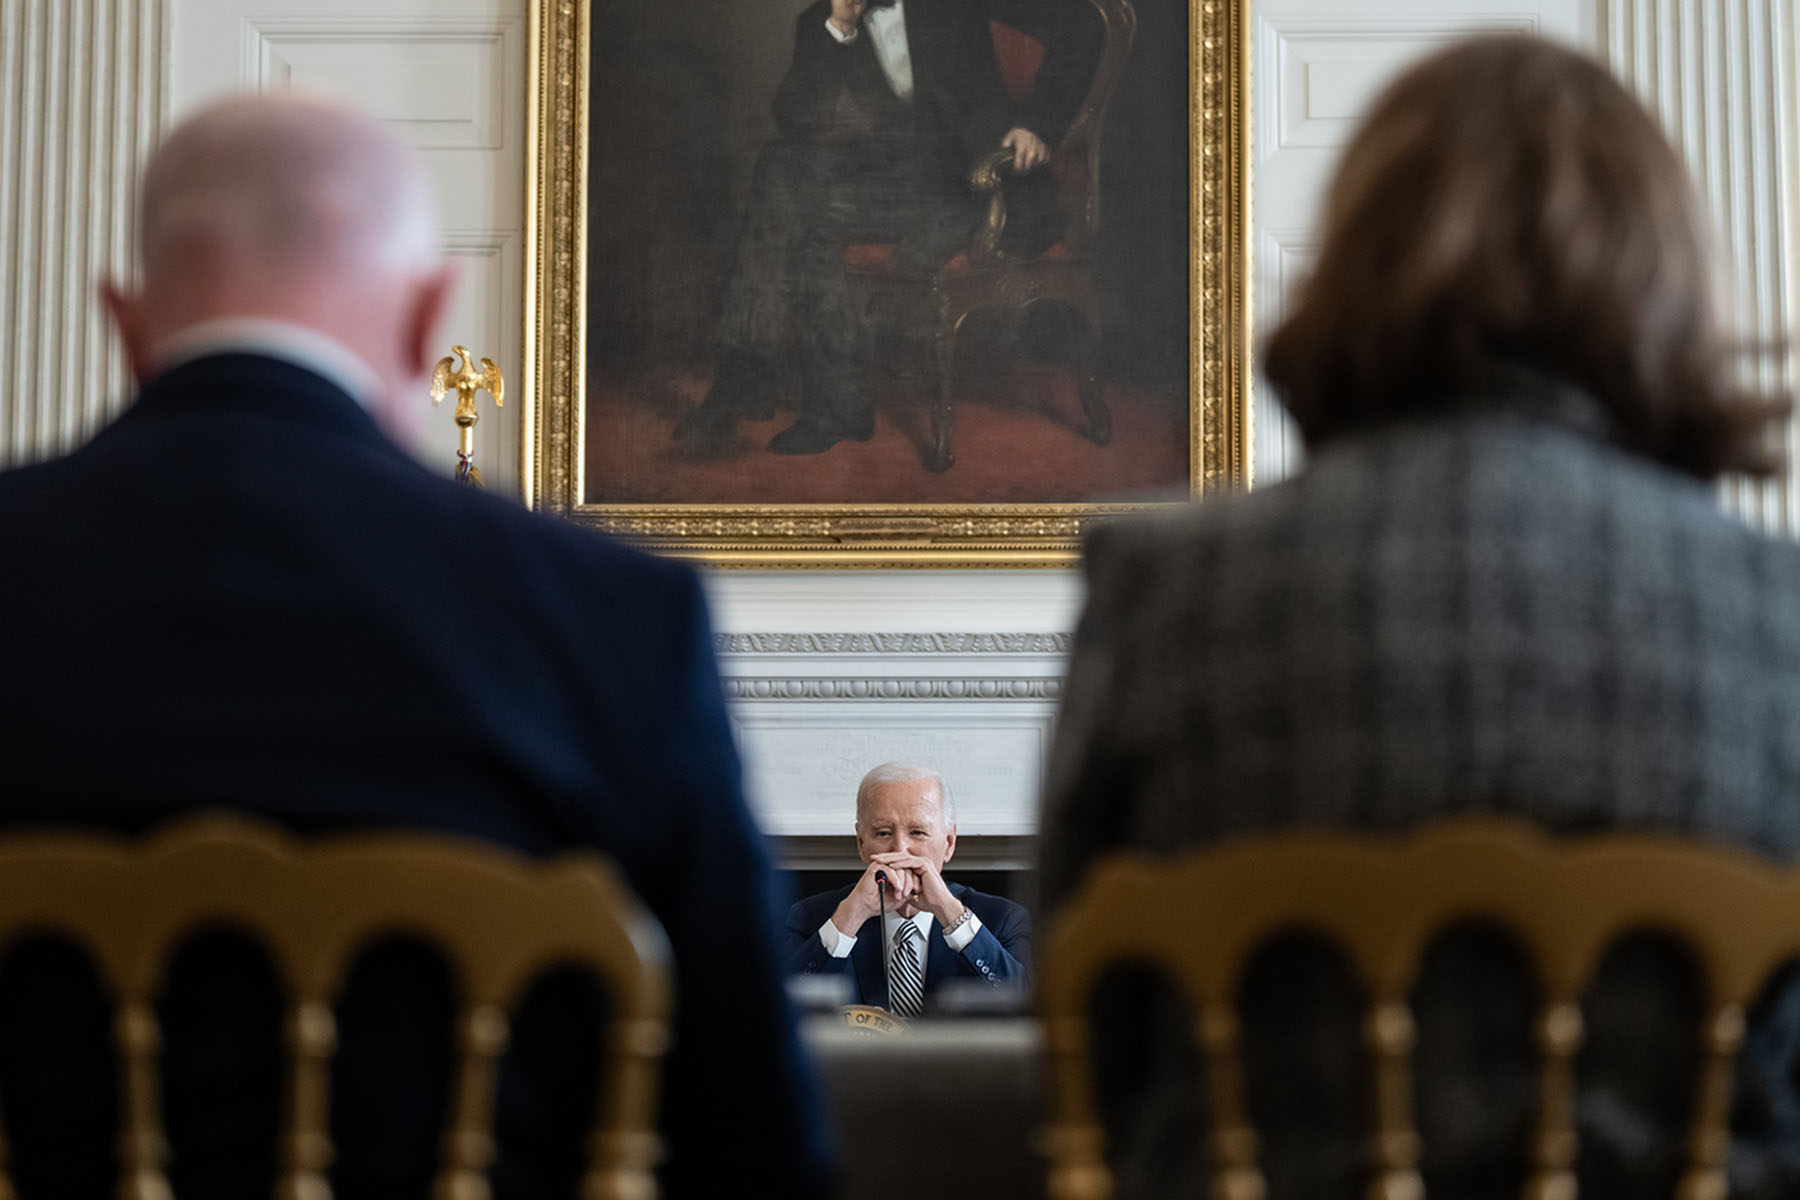 President Joe Biden holds a Reproductive Health Task Force meeting in the State Dining Room of the White House.